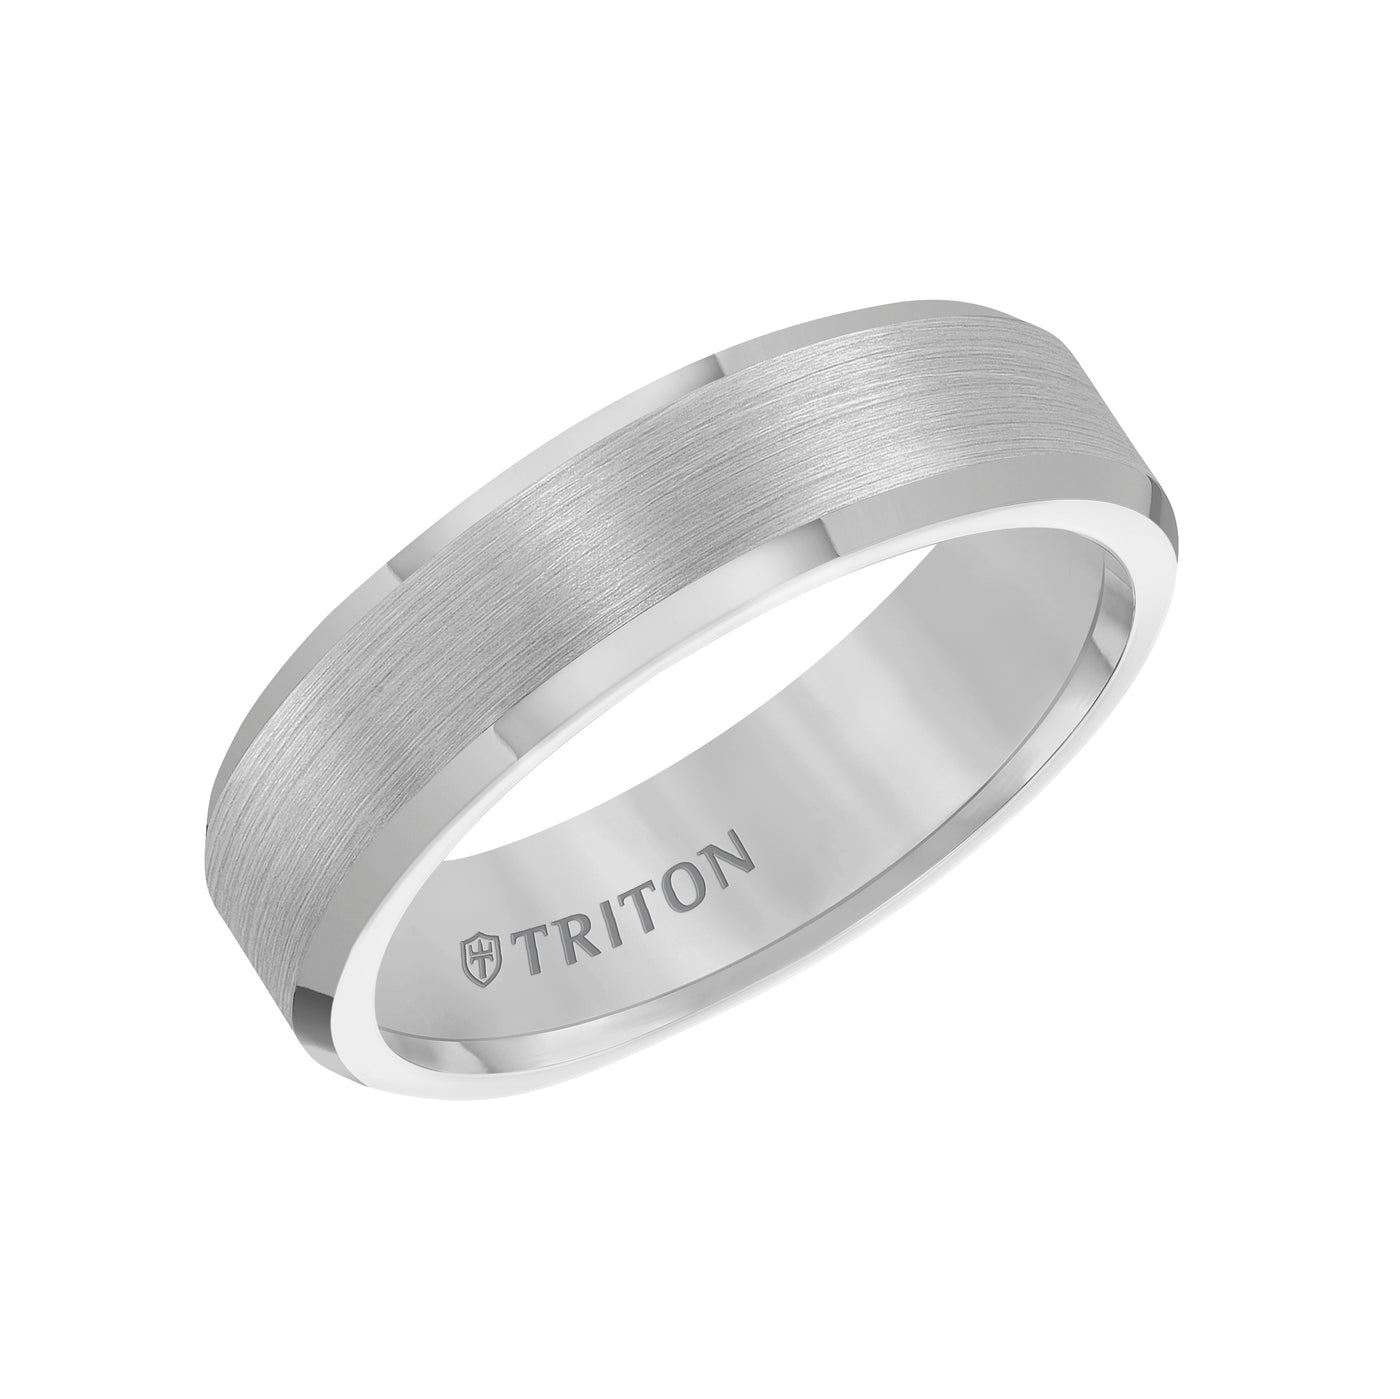 6mm Bevel Edge White Tungsten Carbide comfort fit Band with center satin finish and bright polished edge